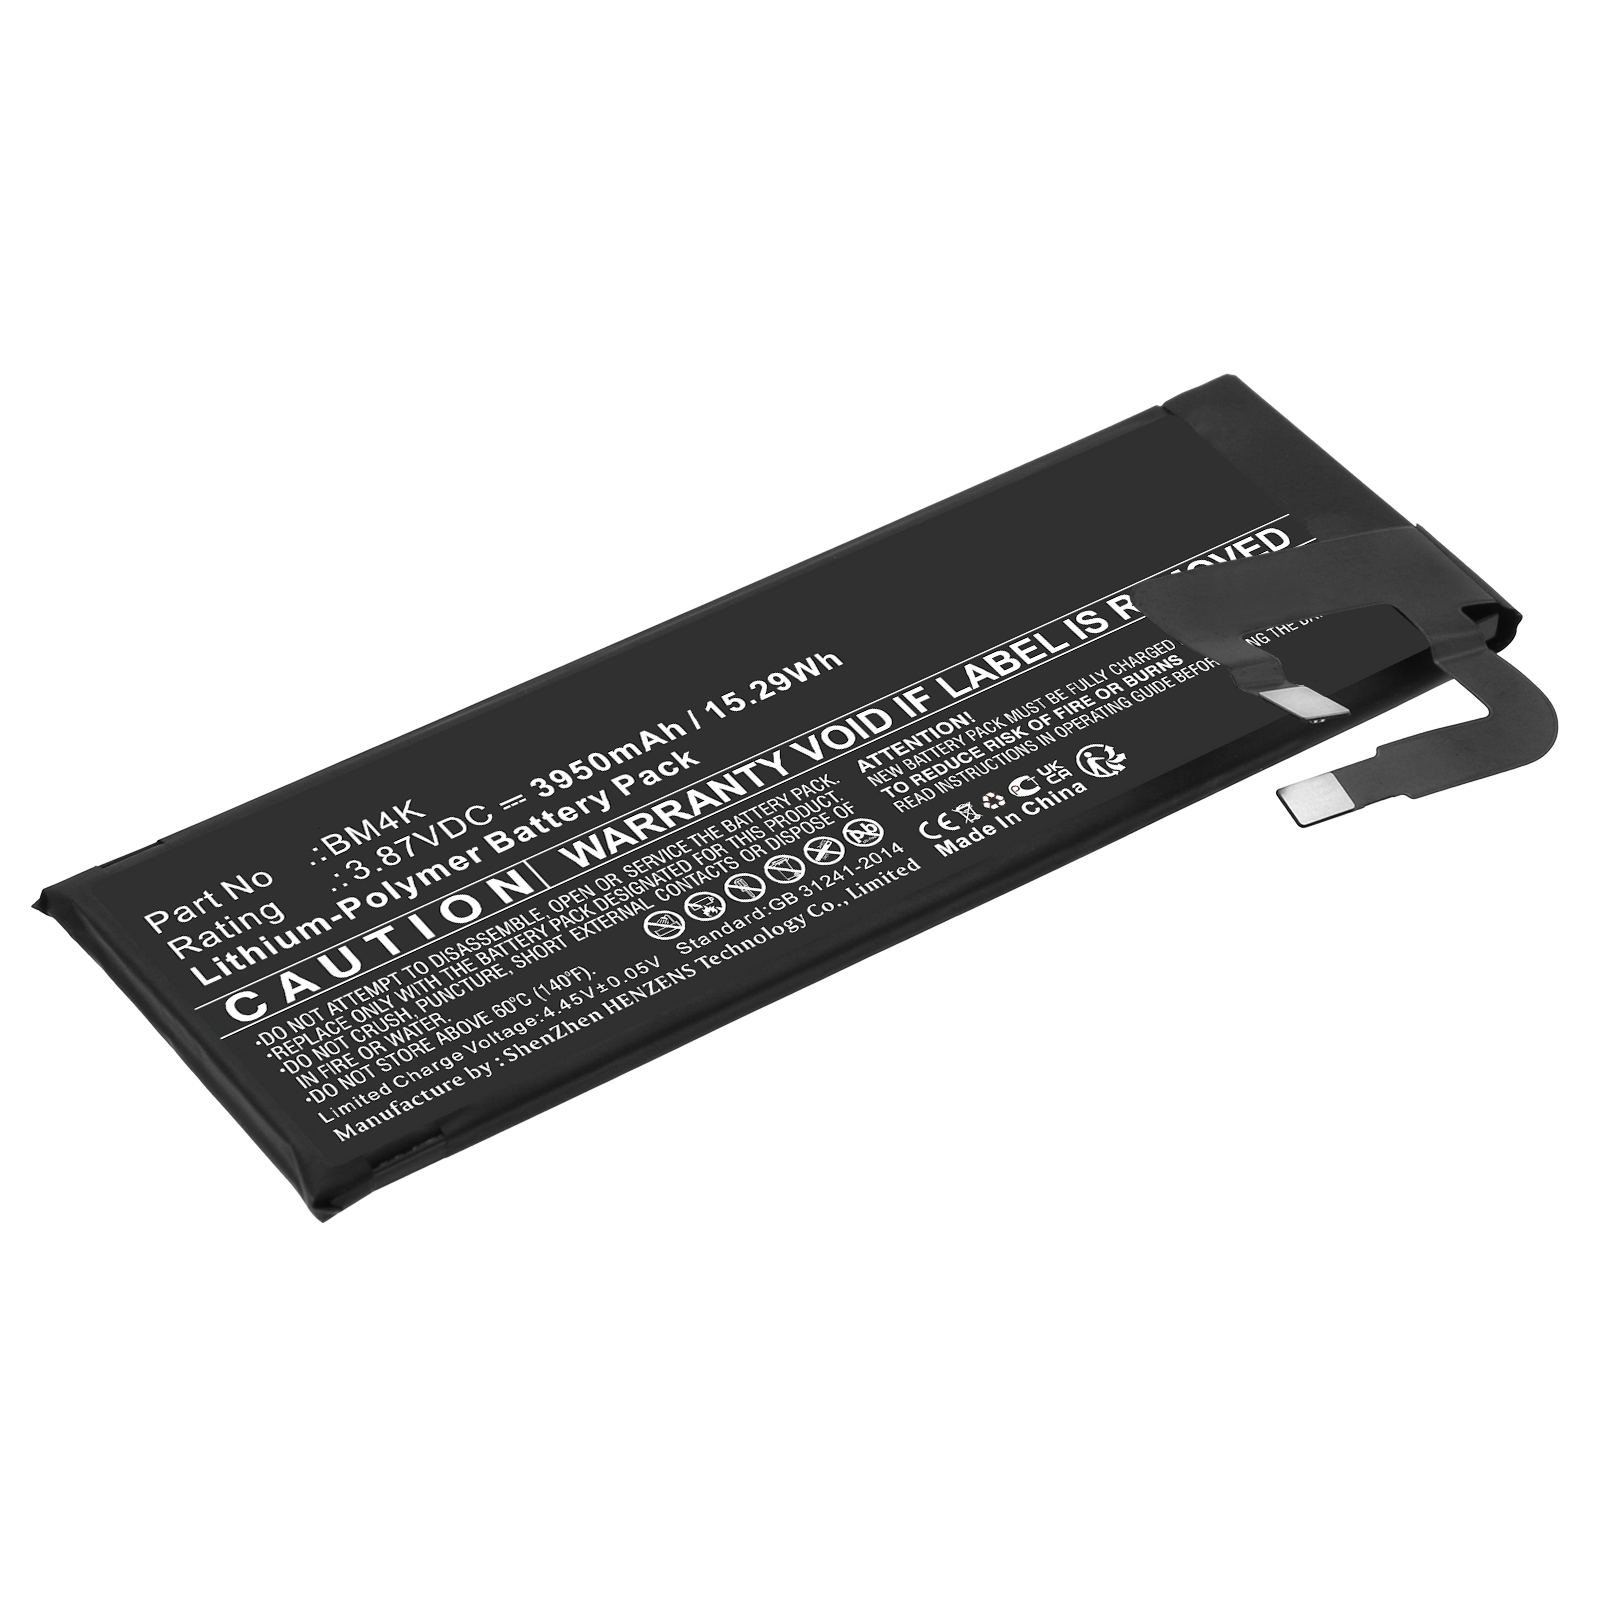 Synergy Digital Cell Phone Battery, Compatible with Xiaomi BM4K Cell Phone Battery (Li-Pol, 3.87V, 3950mAh)